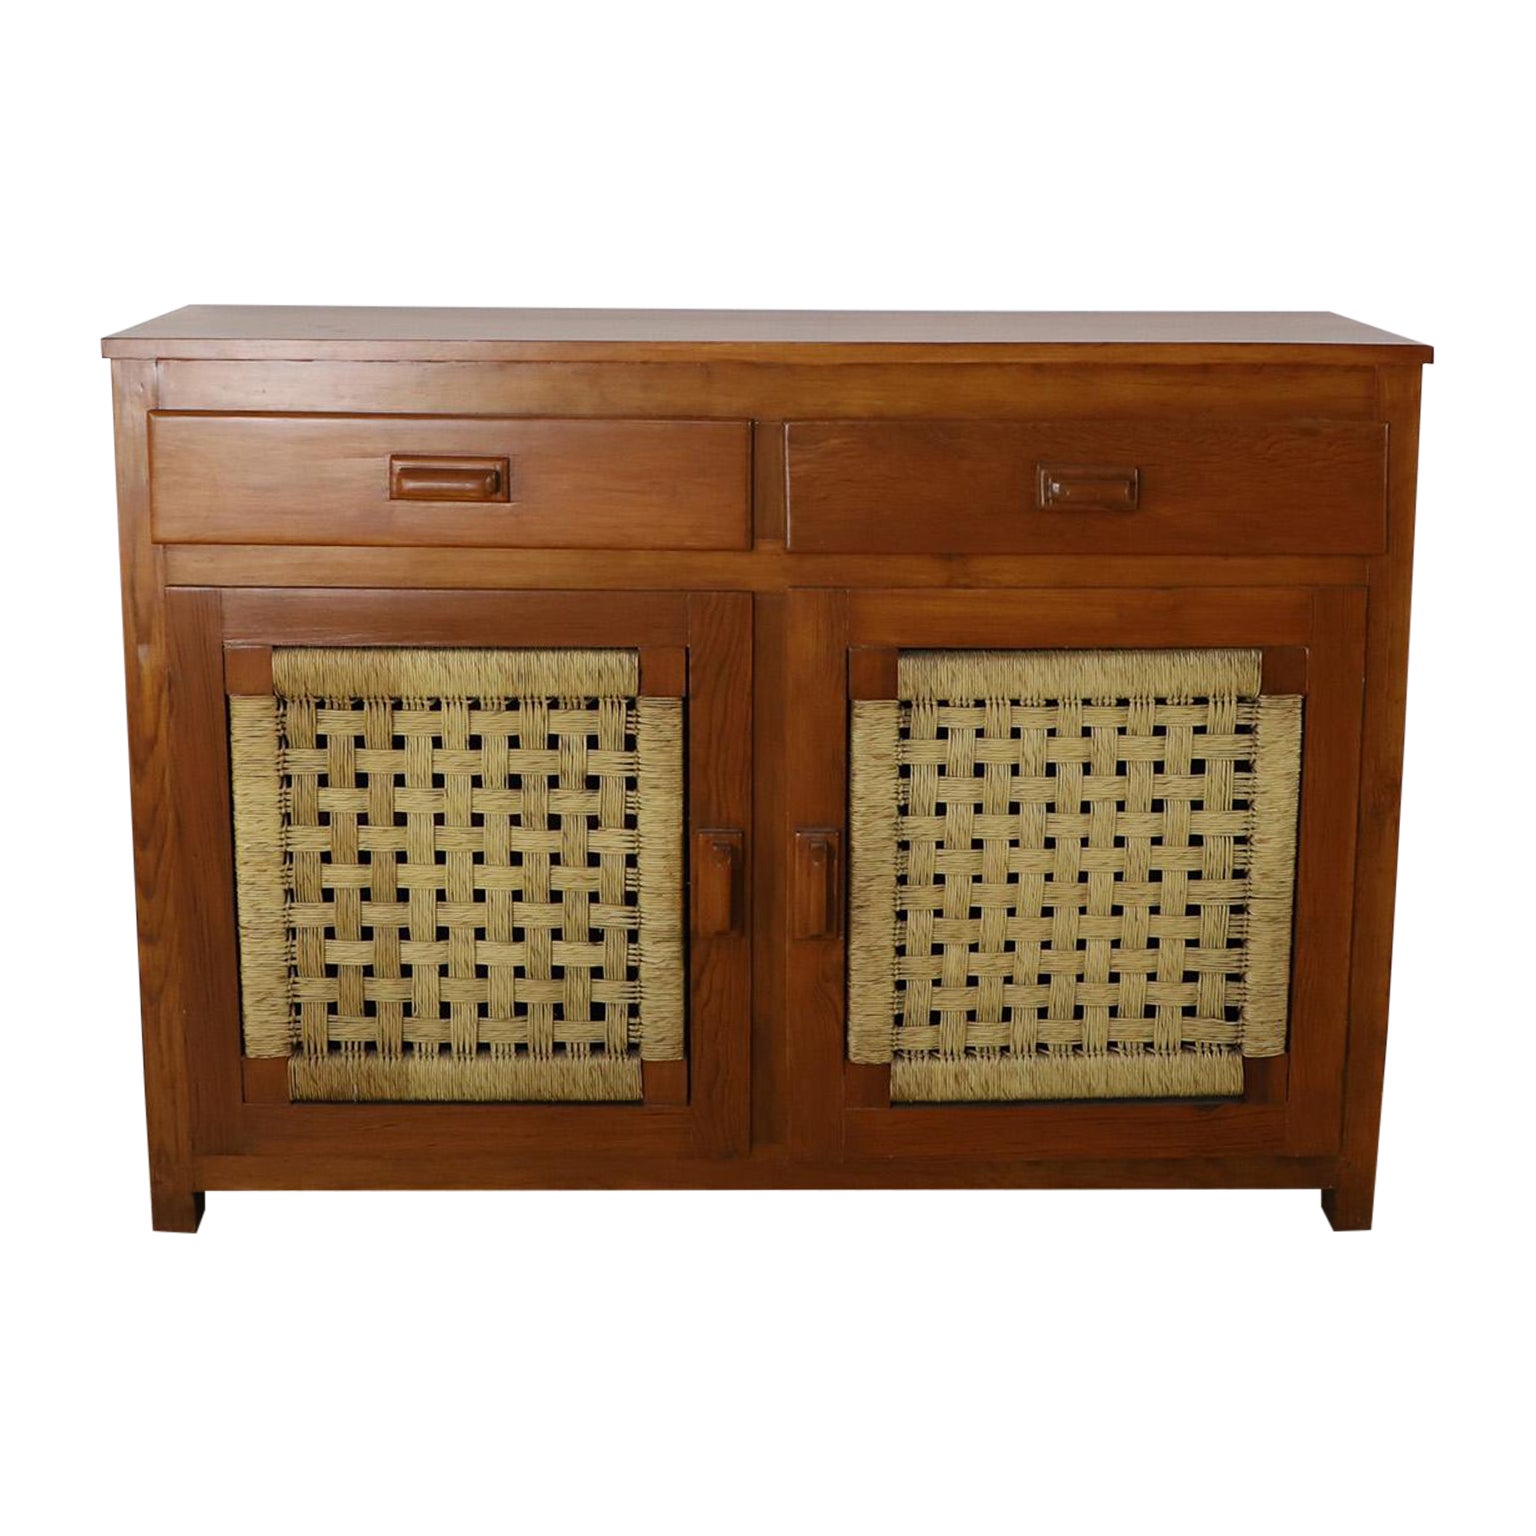 Midcentury Credenza in the Style of Clara Porset For Sale